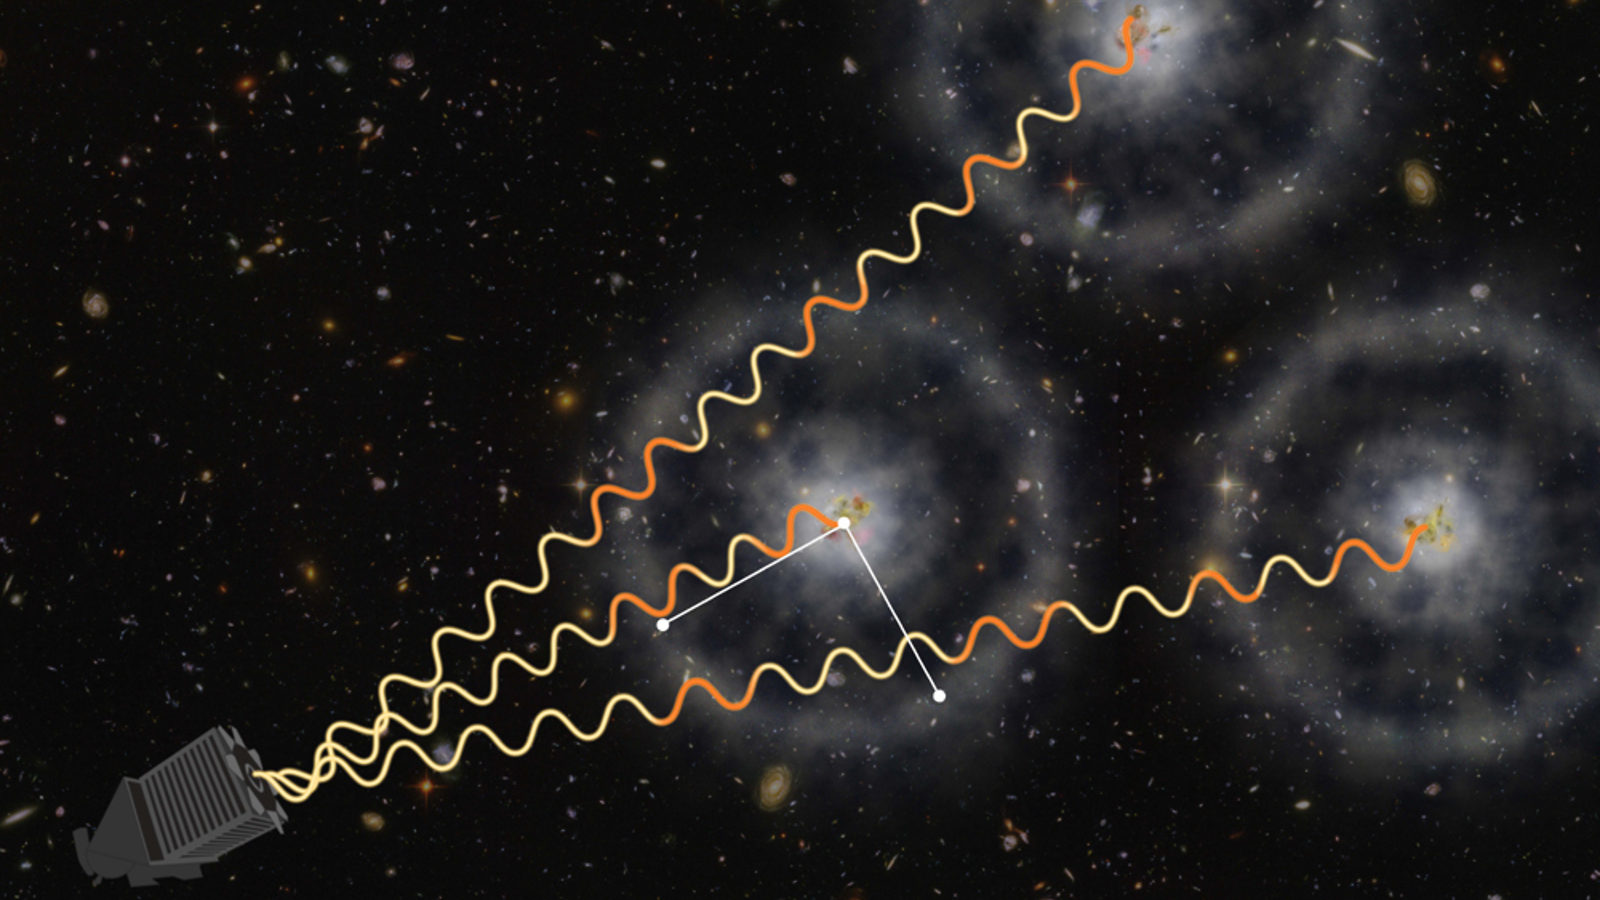 Expanding universe measured with precision | symmetry magazine